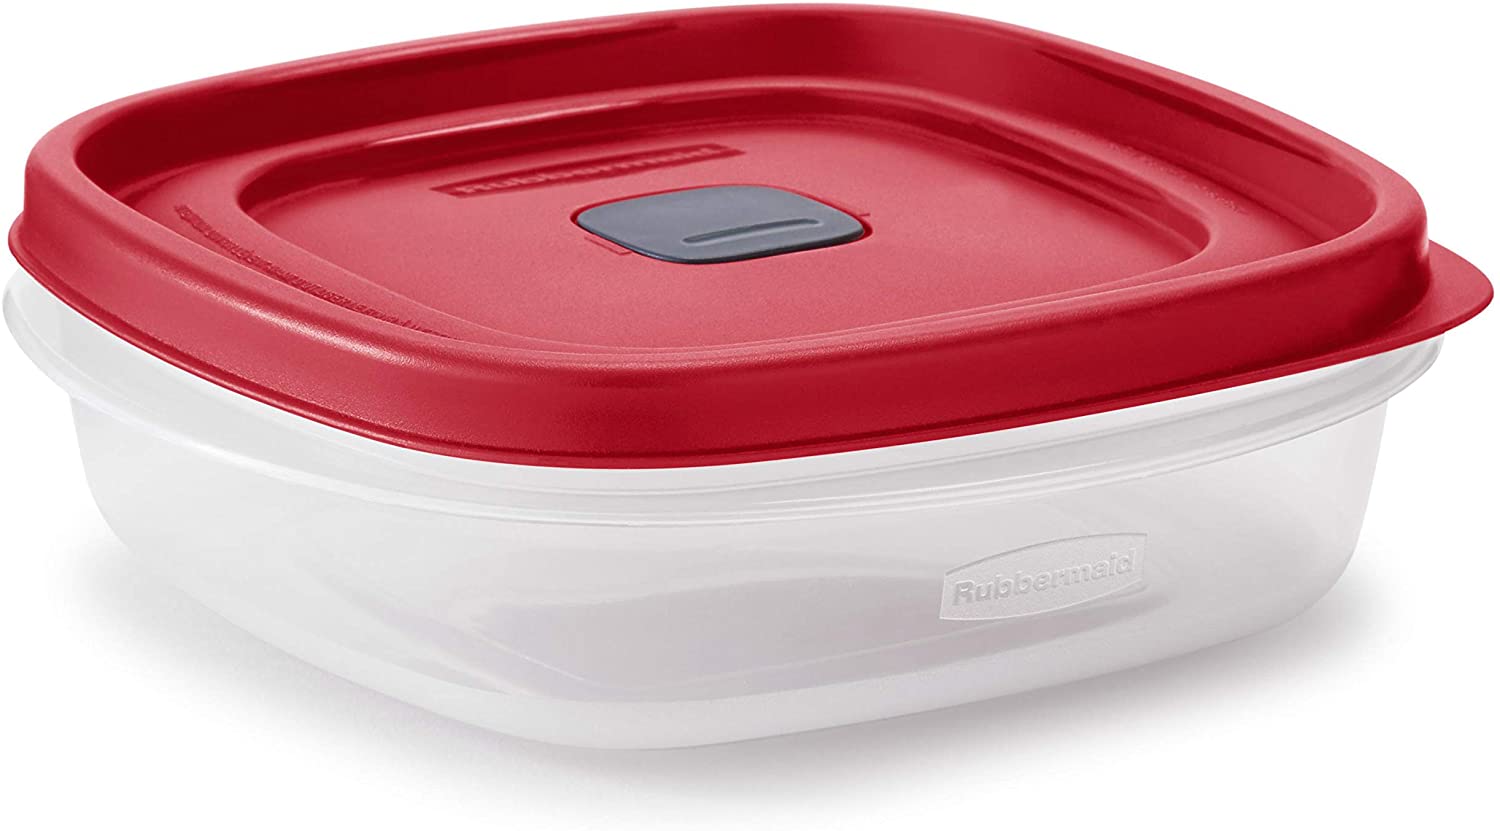 Rubbermaid EasyFindLids Food Storage Container, 710 ml - Whole and All